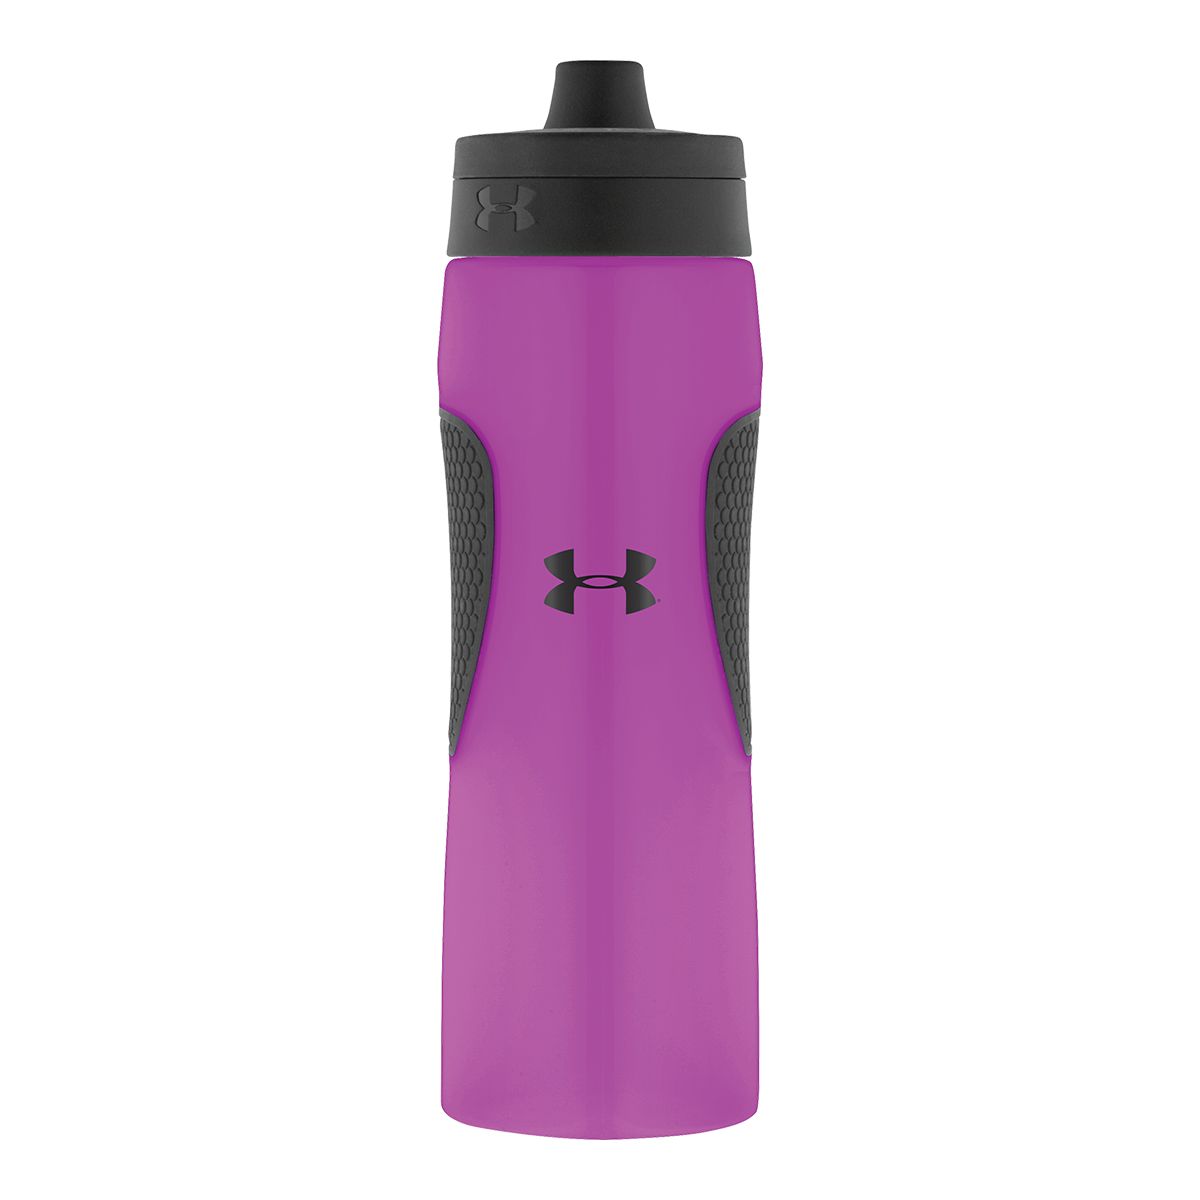 https://media-www.atmosphere.ca/product/div-01-hardgoods/dpt-38-hydration/sdpt-10-squeeze/331208295/under-armour-24oz-squeeze-bot-up4100sttri6-pink-n-s--668485b2-3cbf-4842-b7b0-17c1ad06e060-jpgrendition.jpg?imdensity=1&imwidth=1244&impolicy=mZoom